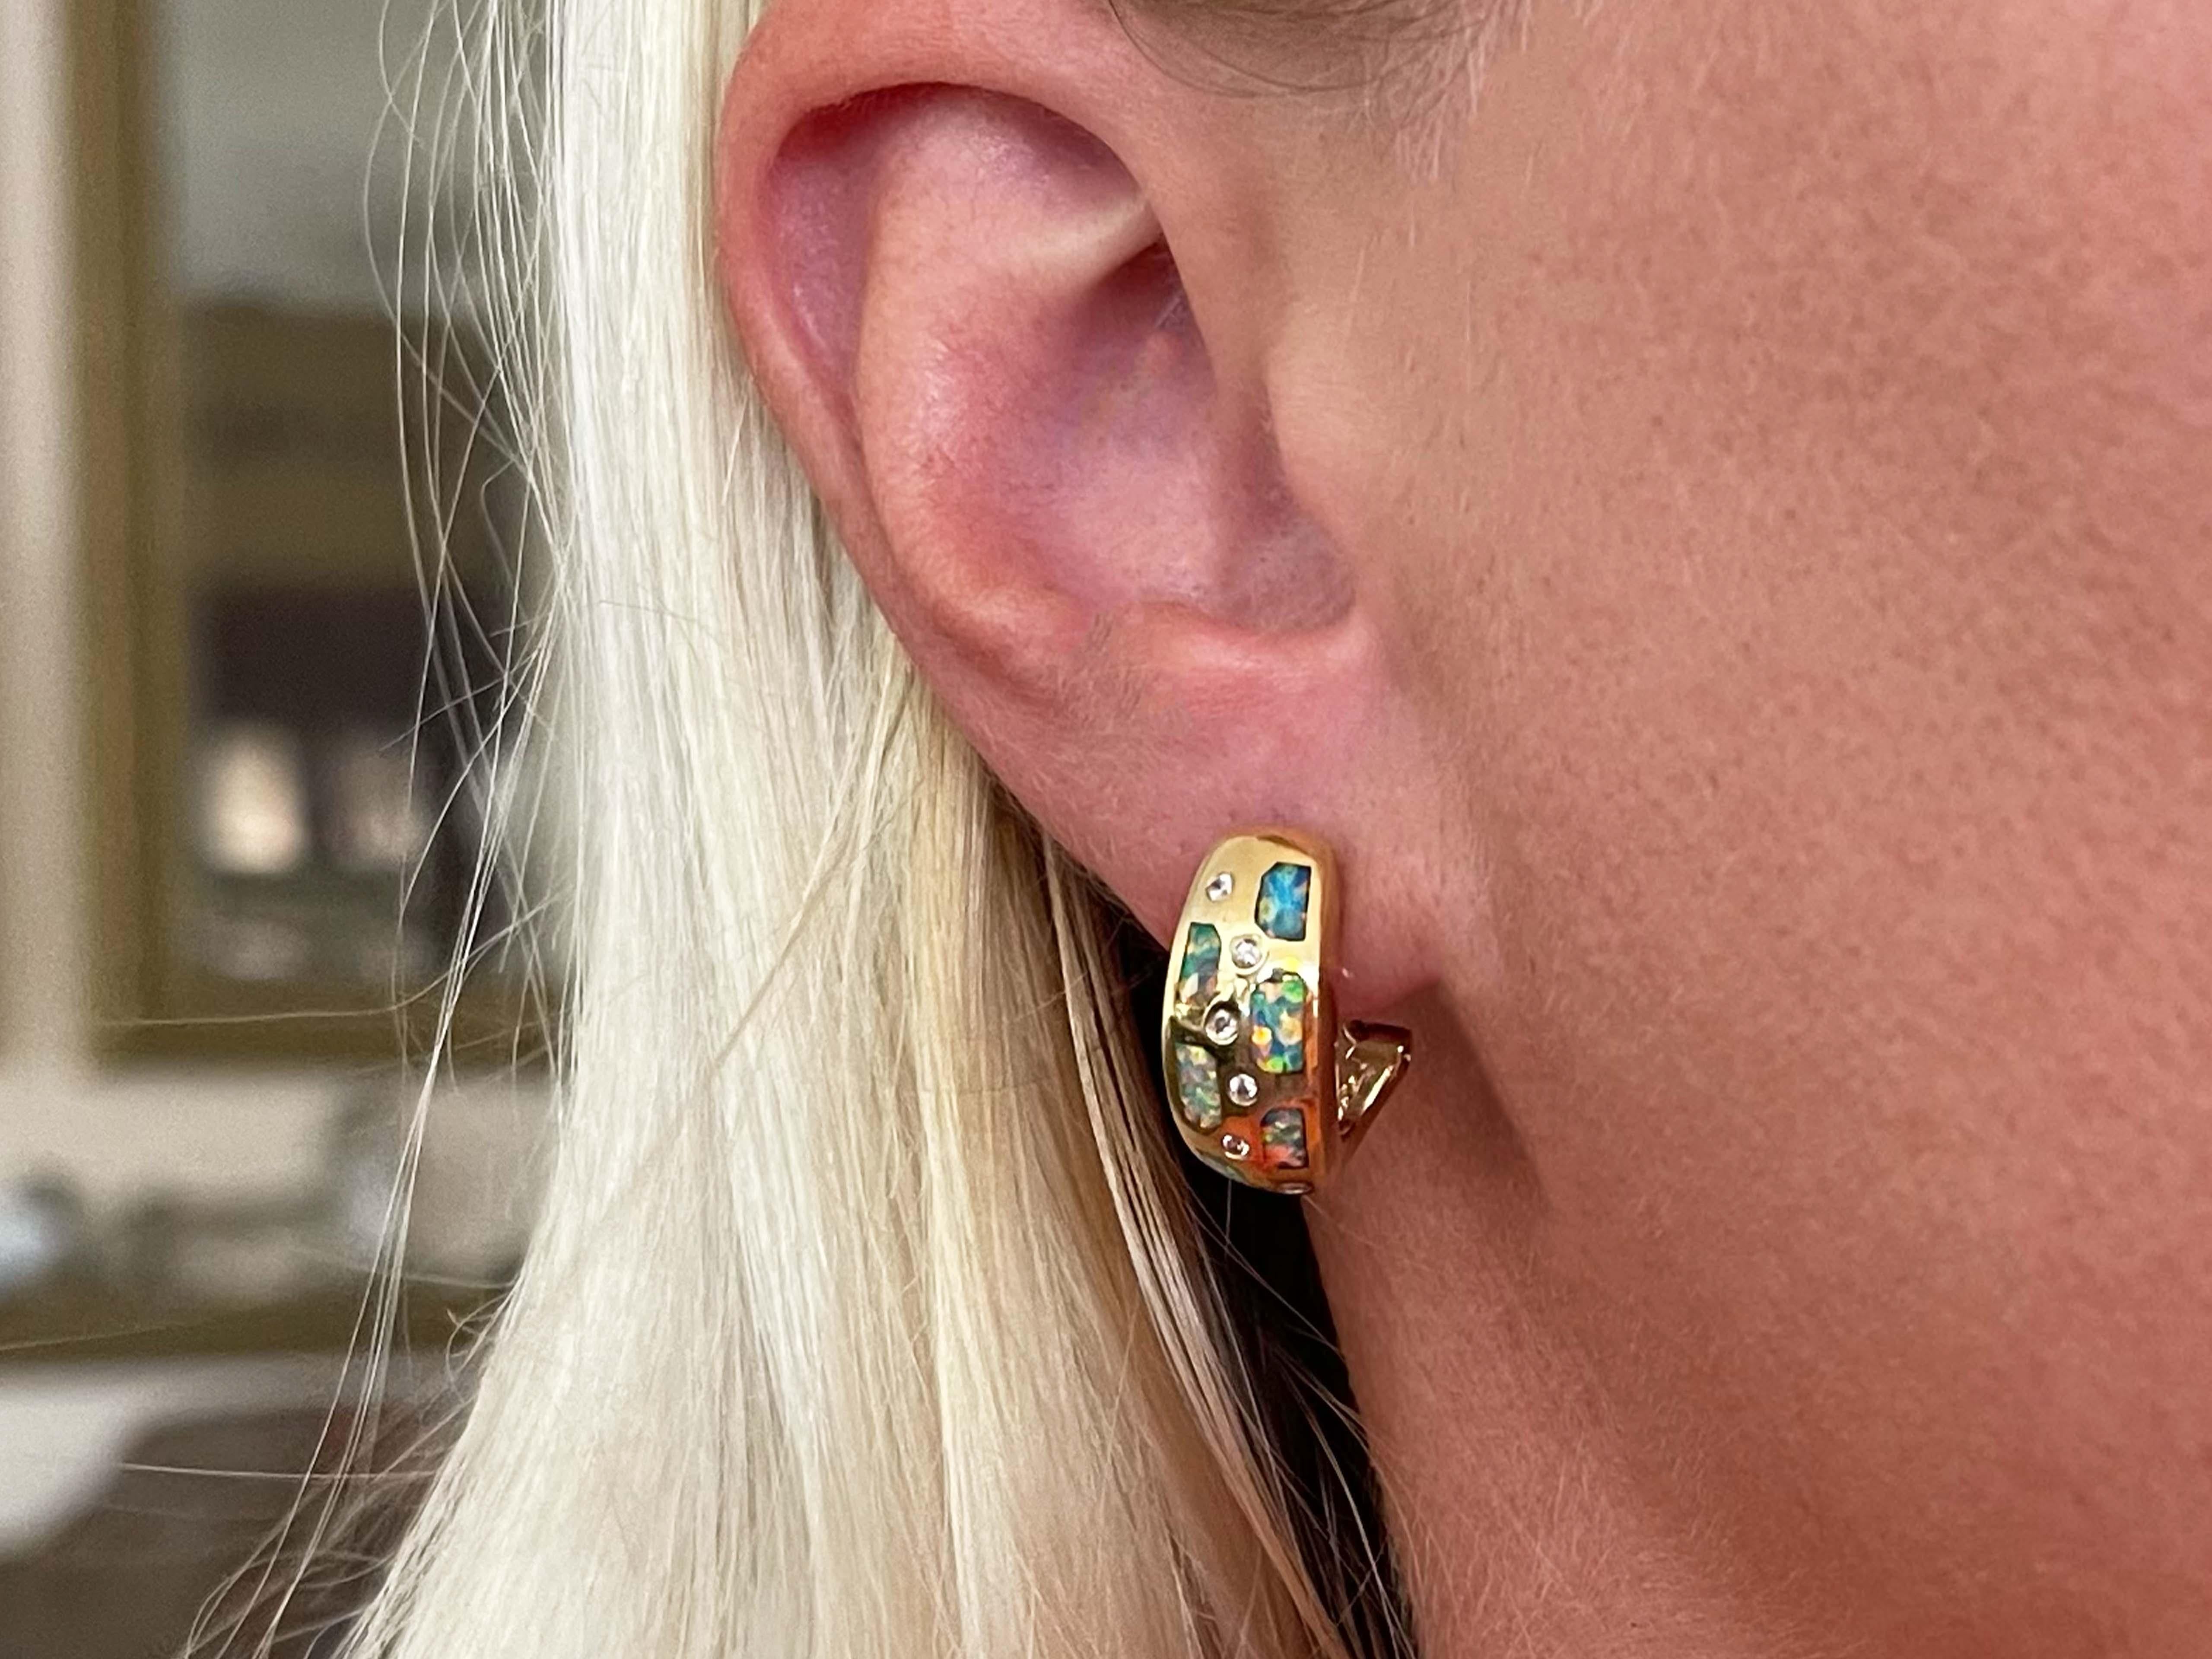 Earrings Specifications:

Metal: 14k Yellow Gold

Earring Diameter: 18 mm

Gemstone Inlay: Black Opal

Diamond Carat Weight: 0.12

Diamond Color: G-H

Diamond Clarity: SI1

Total Weight: 9.6 Grams

Stamped: 